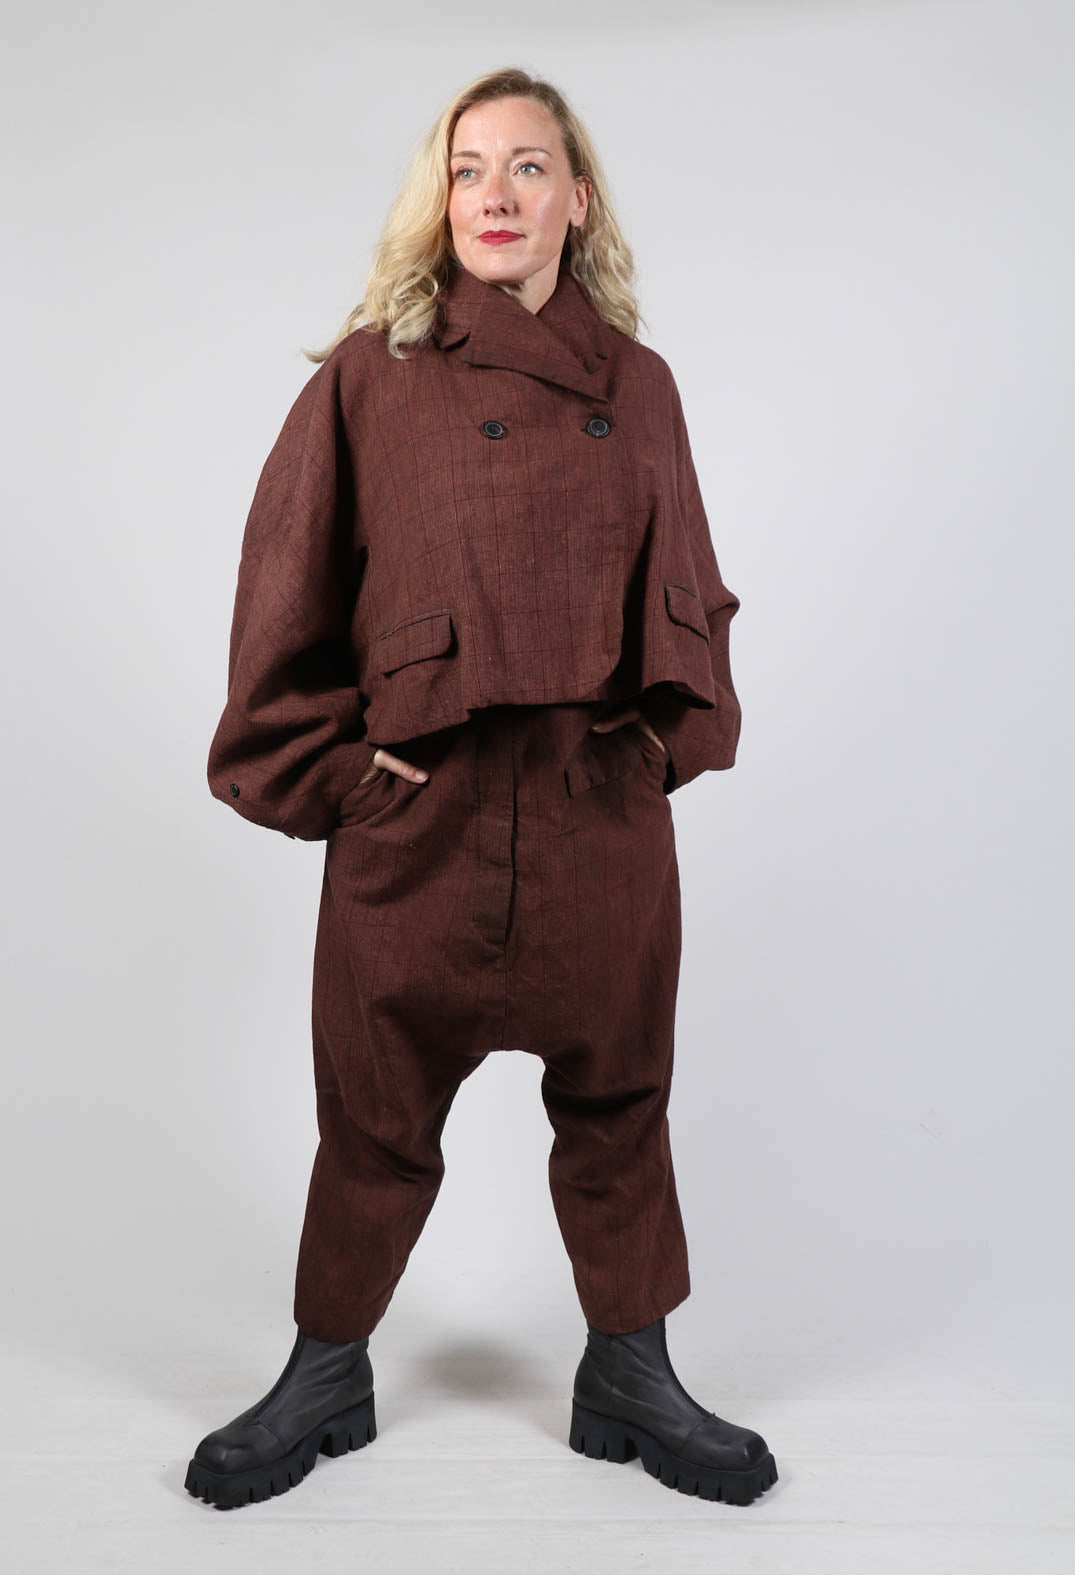 Cropped Drop Crotch Trousers in Rust Cloud